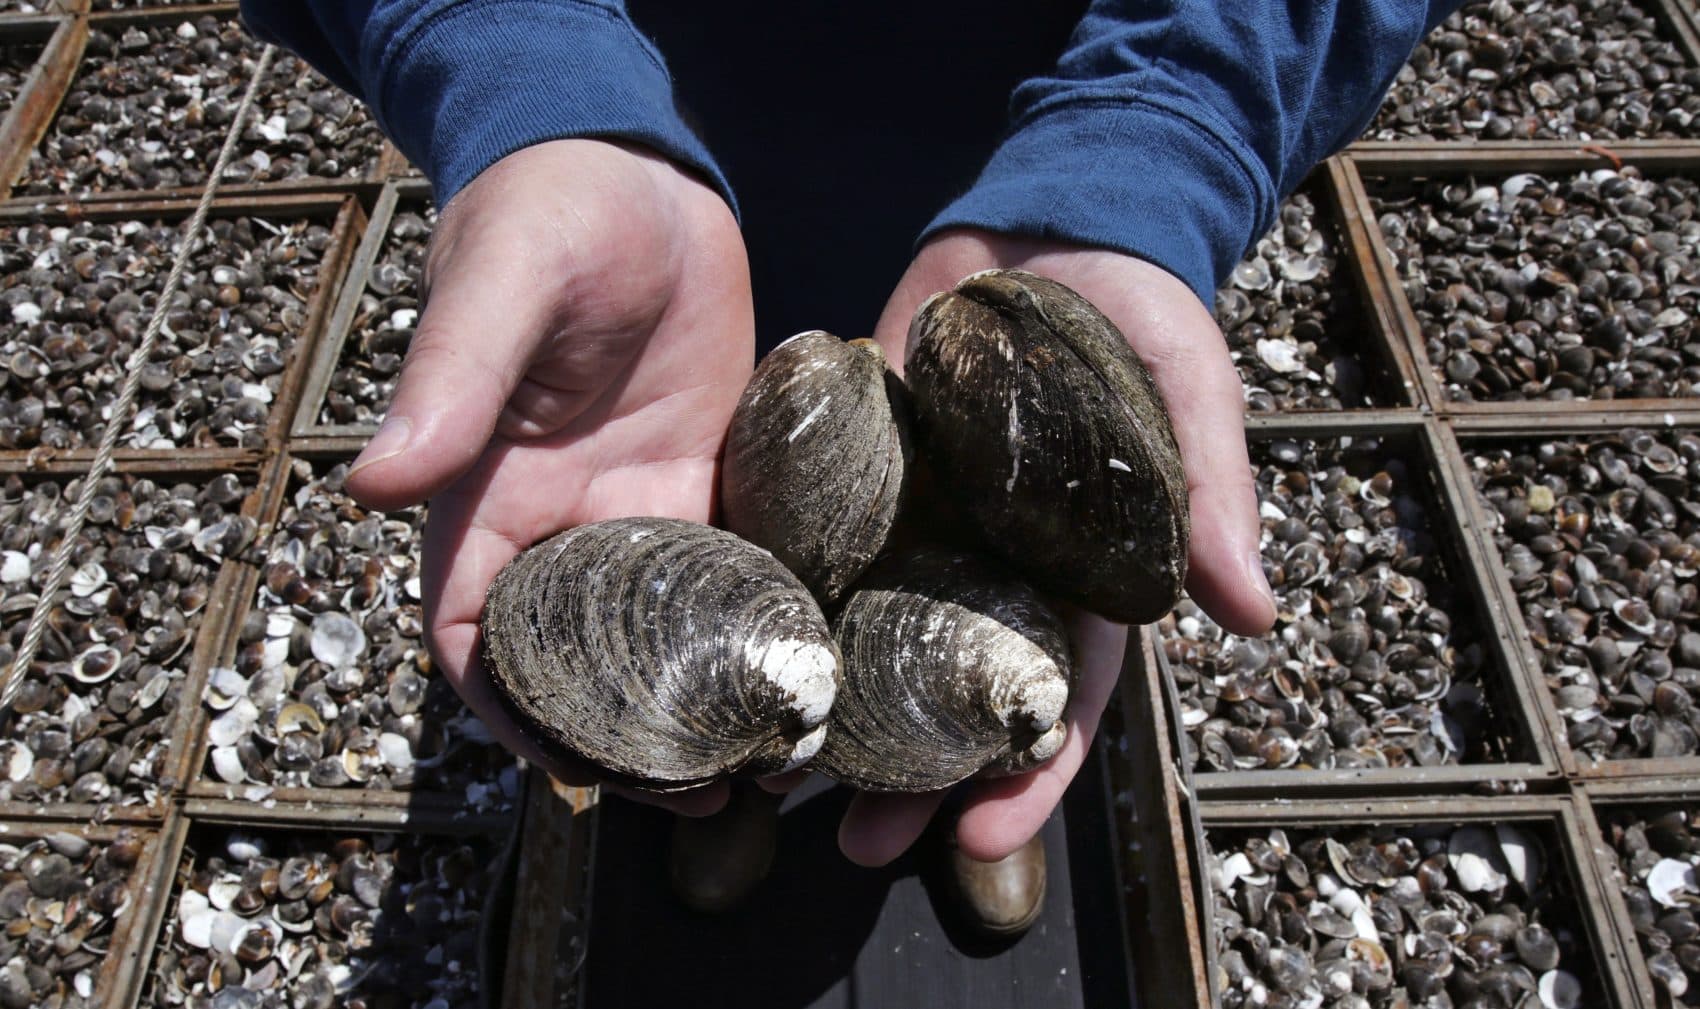 In this May 2016, photo, Mike Mohr, captain of the fishing vessel E.S.S. Pursuit, cradles quahog clams on the deck of his ship while offloading a two-day haul at a dock in New Bedford, Mass. (Charles Krupa/AP)